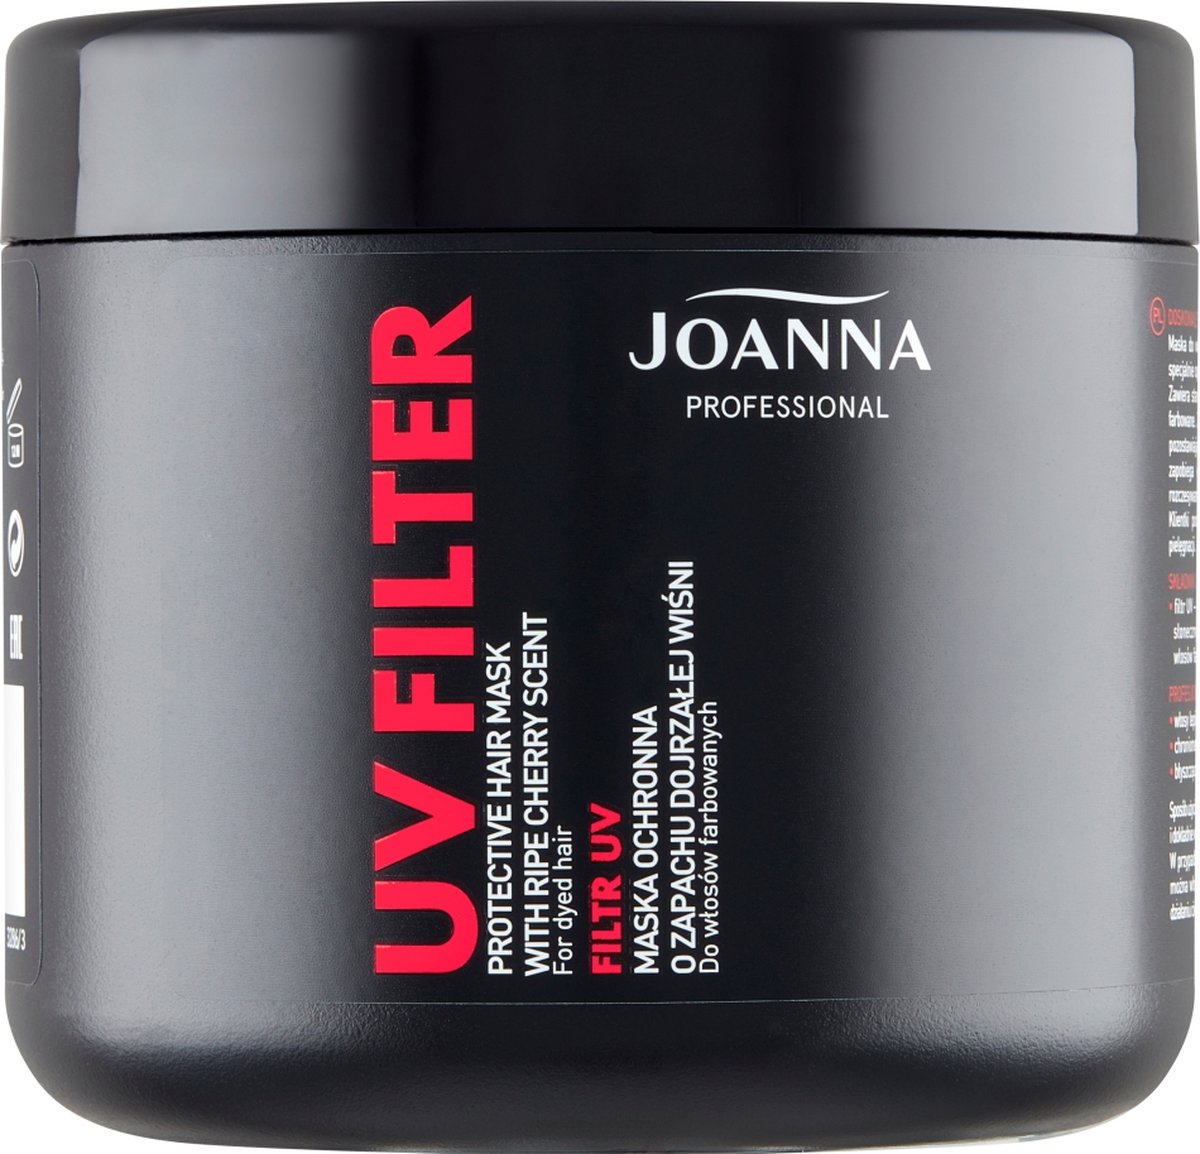 Joanna Professional - Uv Filter Protective Hair Mask For Dyed Hair 500G